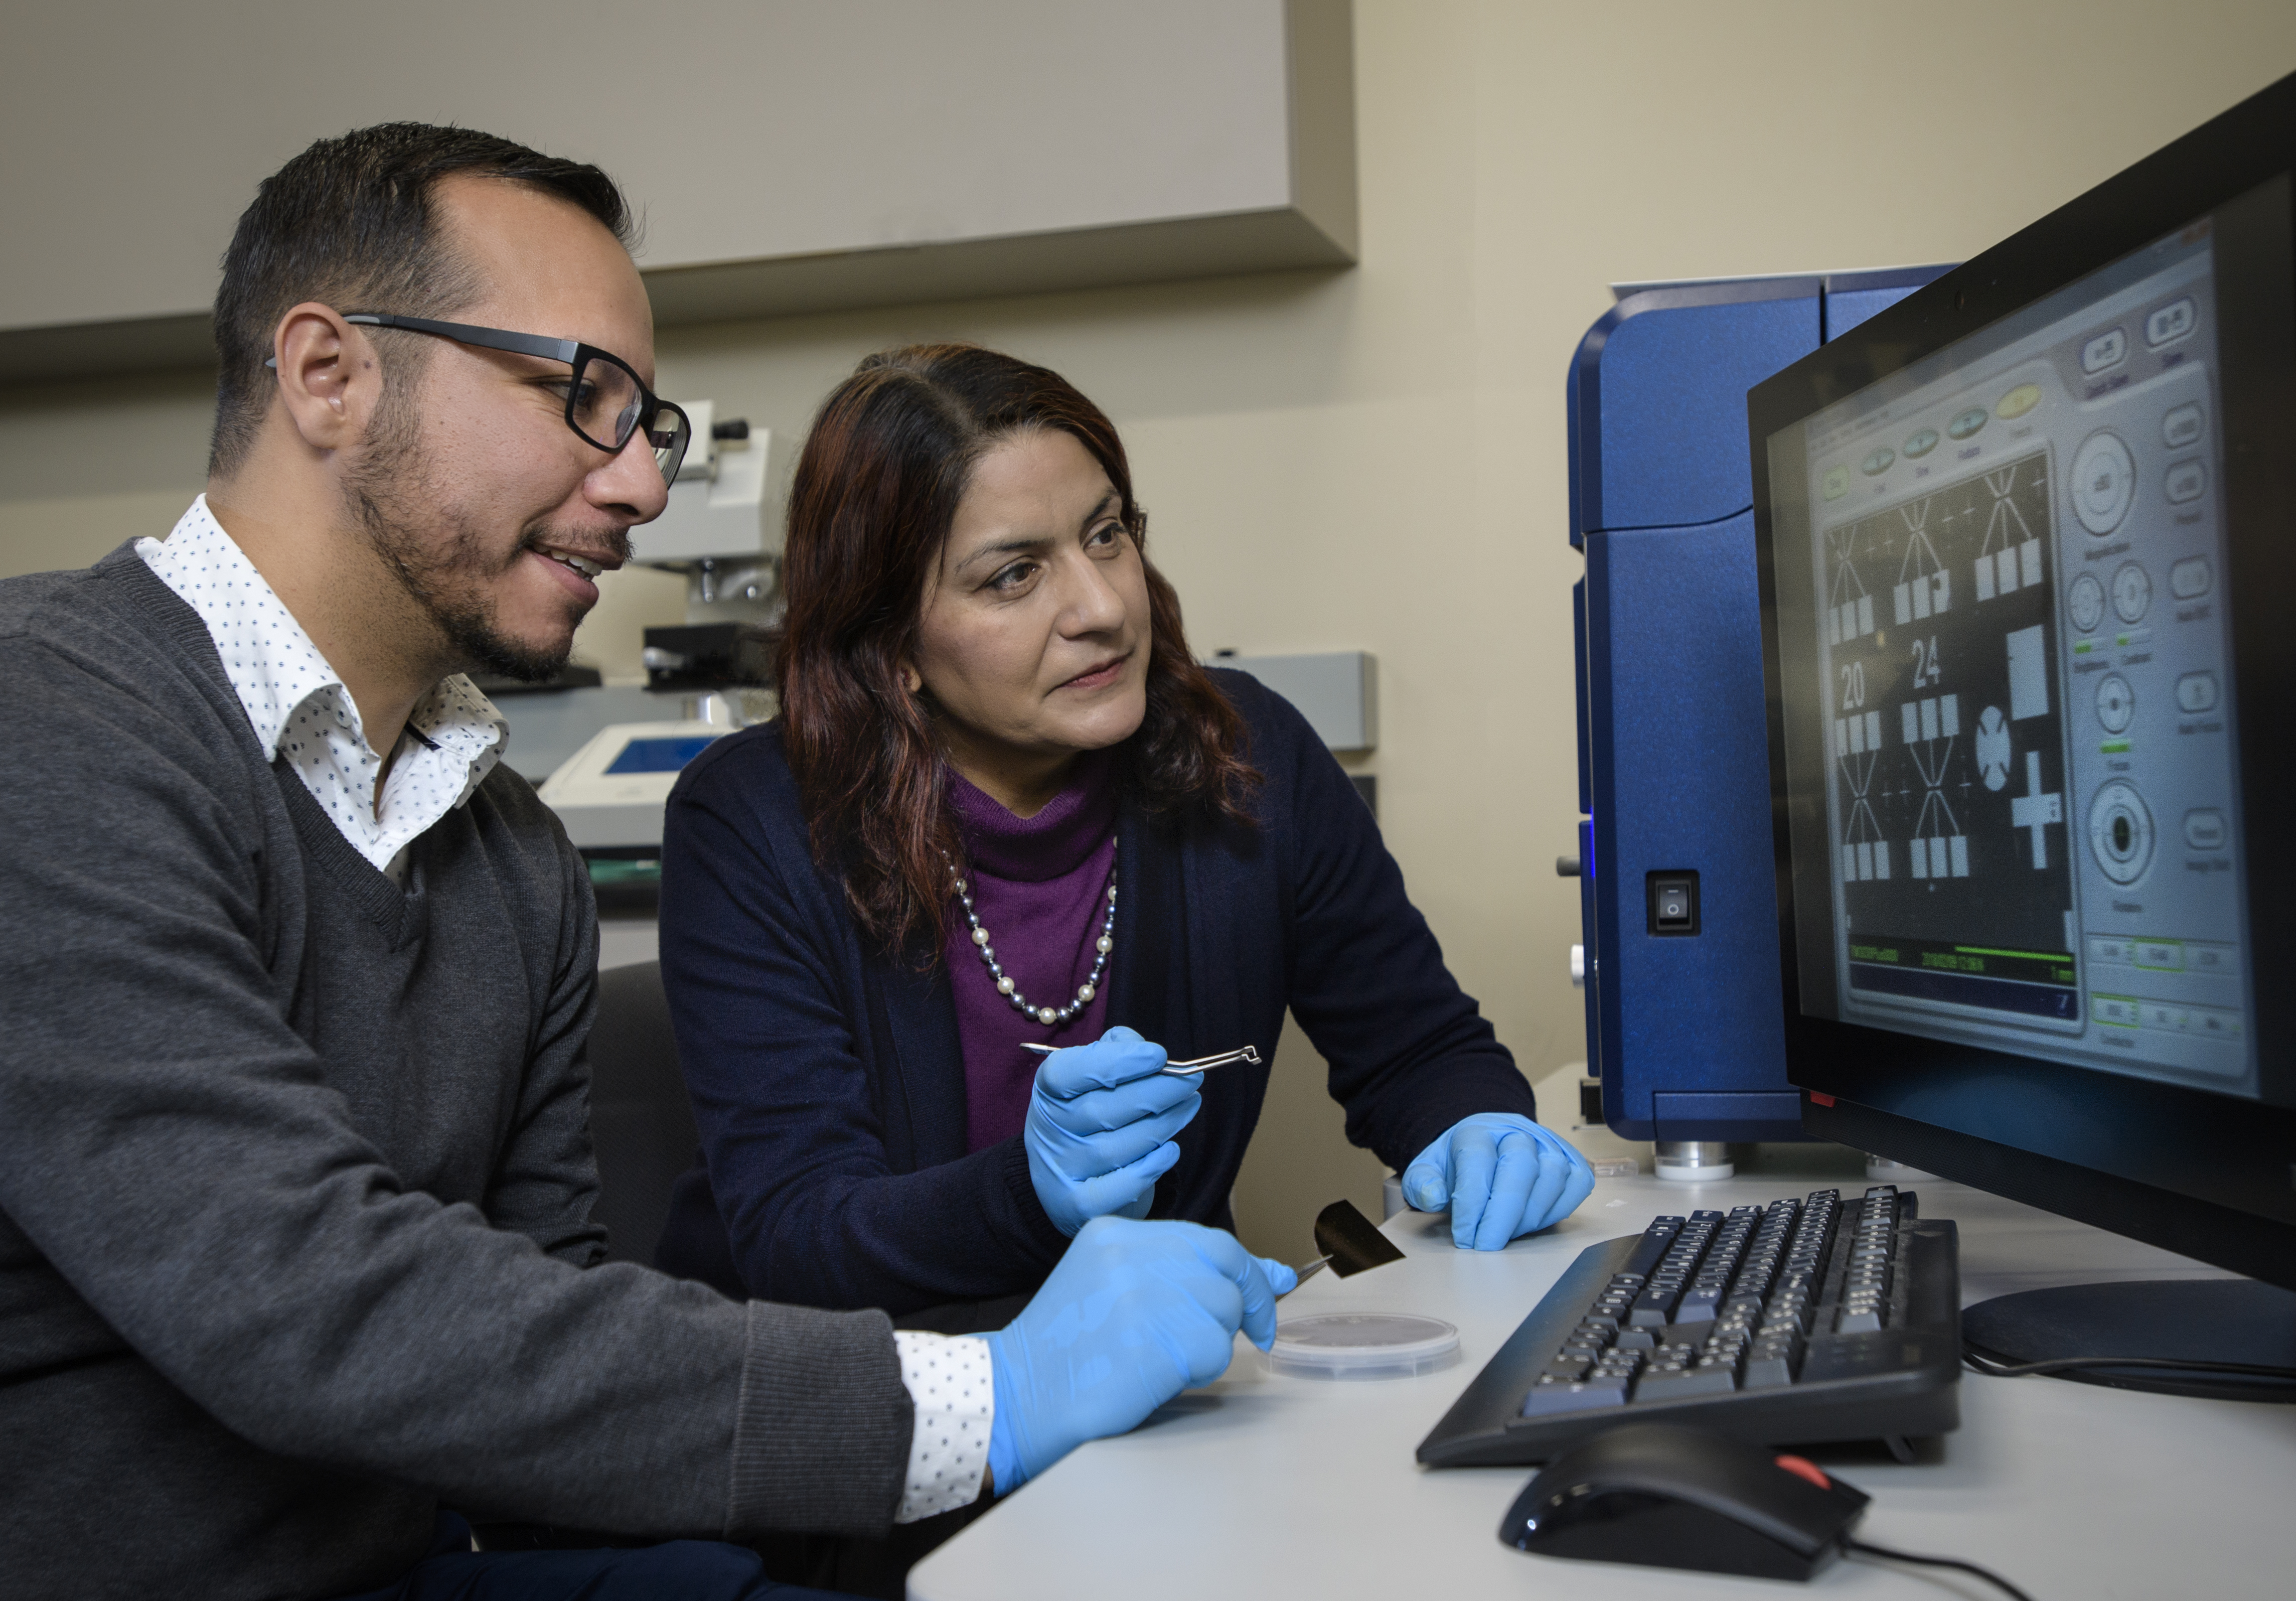 Anupama Kaul, director of the University of North Texas College of Engineering’s PACCAR Technology Institute, and her research group have developed ultra-high performance optoelectronic devices based on molybdenum disulfide – or MoS2 – which shows excellent performance compared to prior studies.